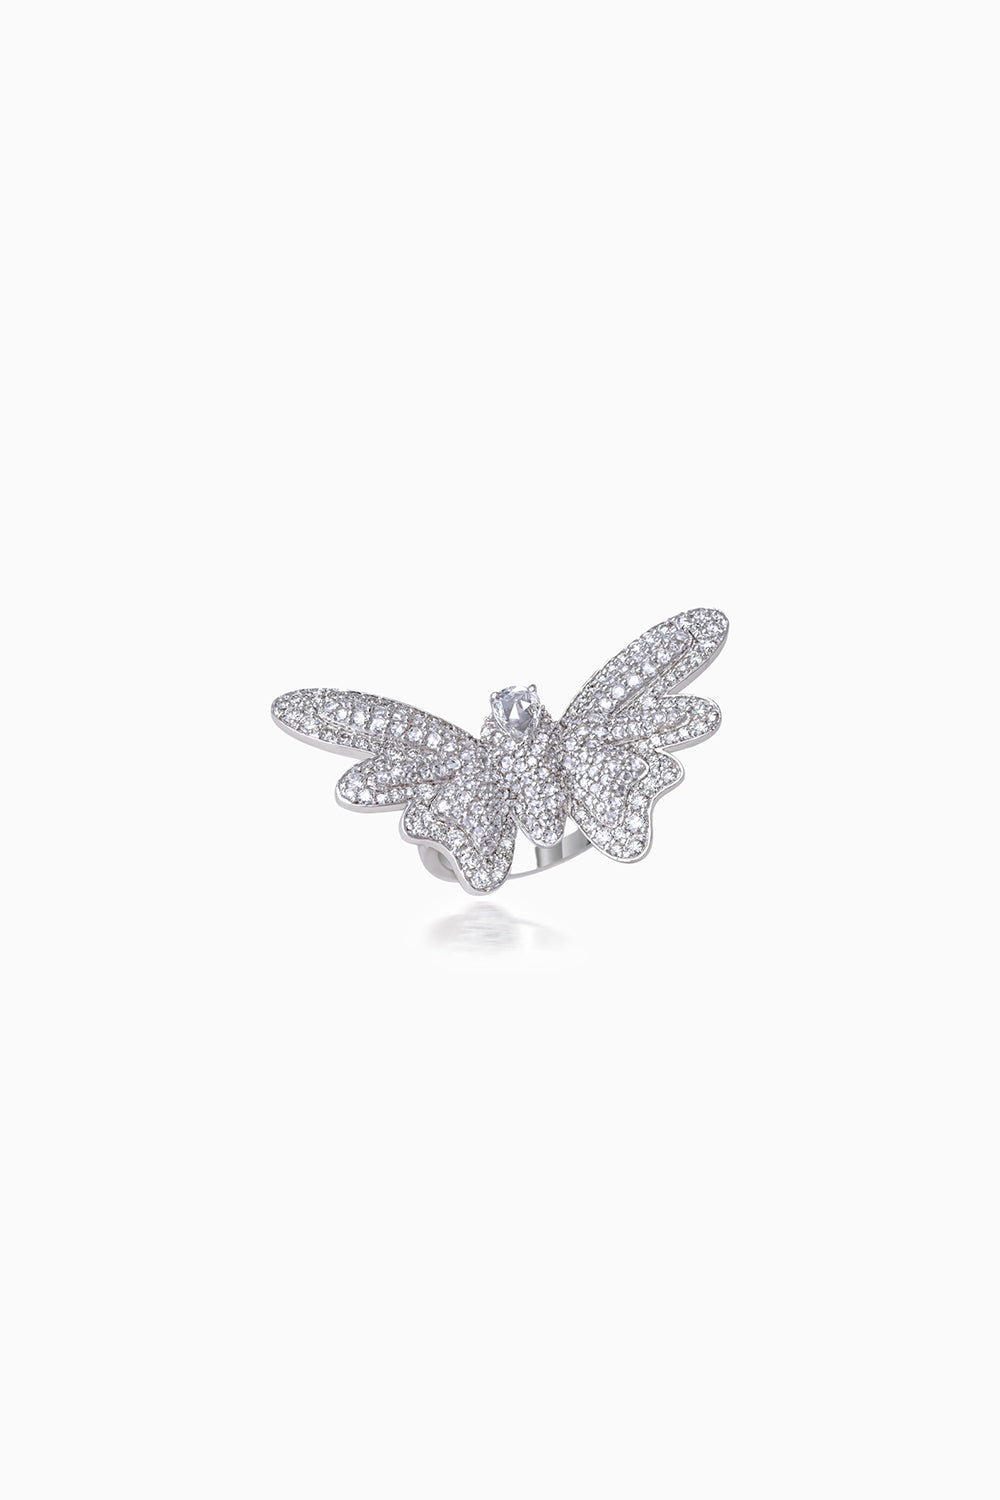 Butterfly Diamond Pave Ring in 18KT White Gold